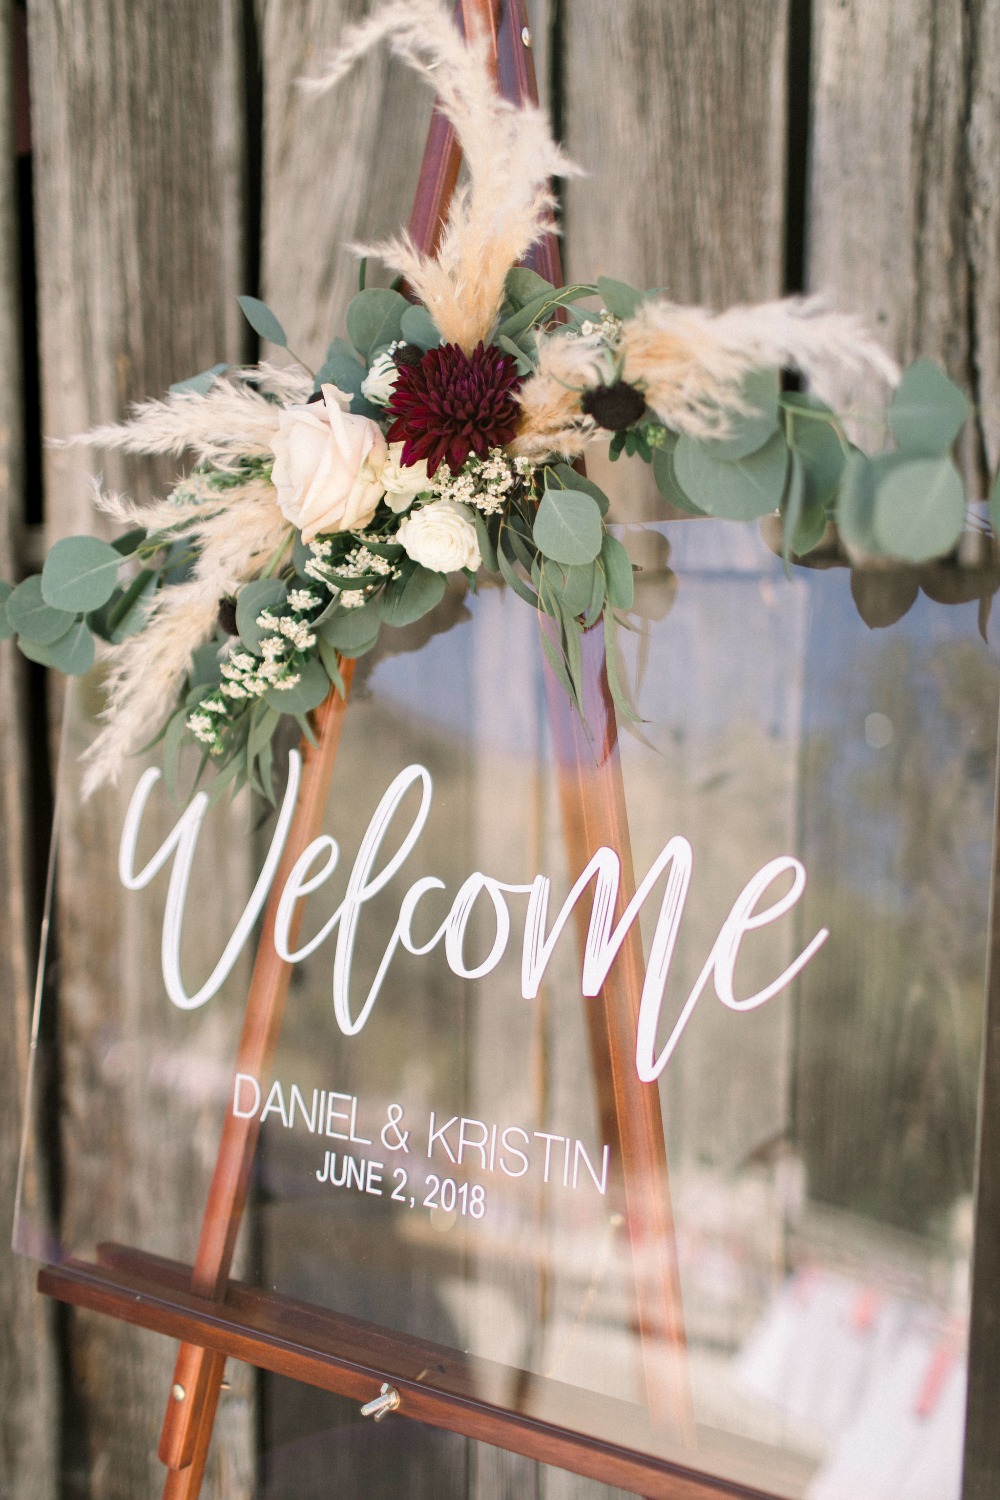 Acrylic wedding welcome sign embellished with Cortaderia Selloana, greeneries and white and burgundy florals.